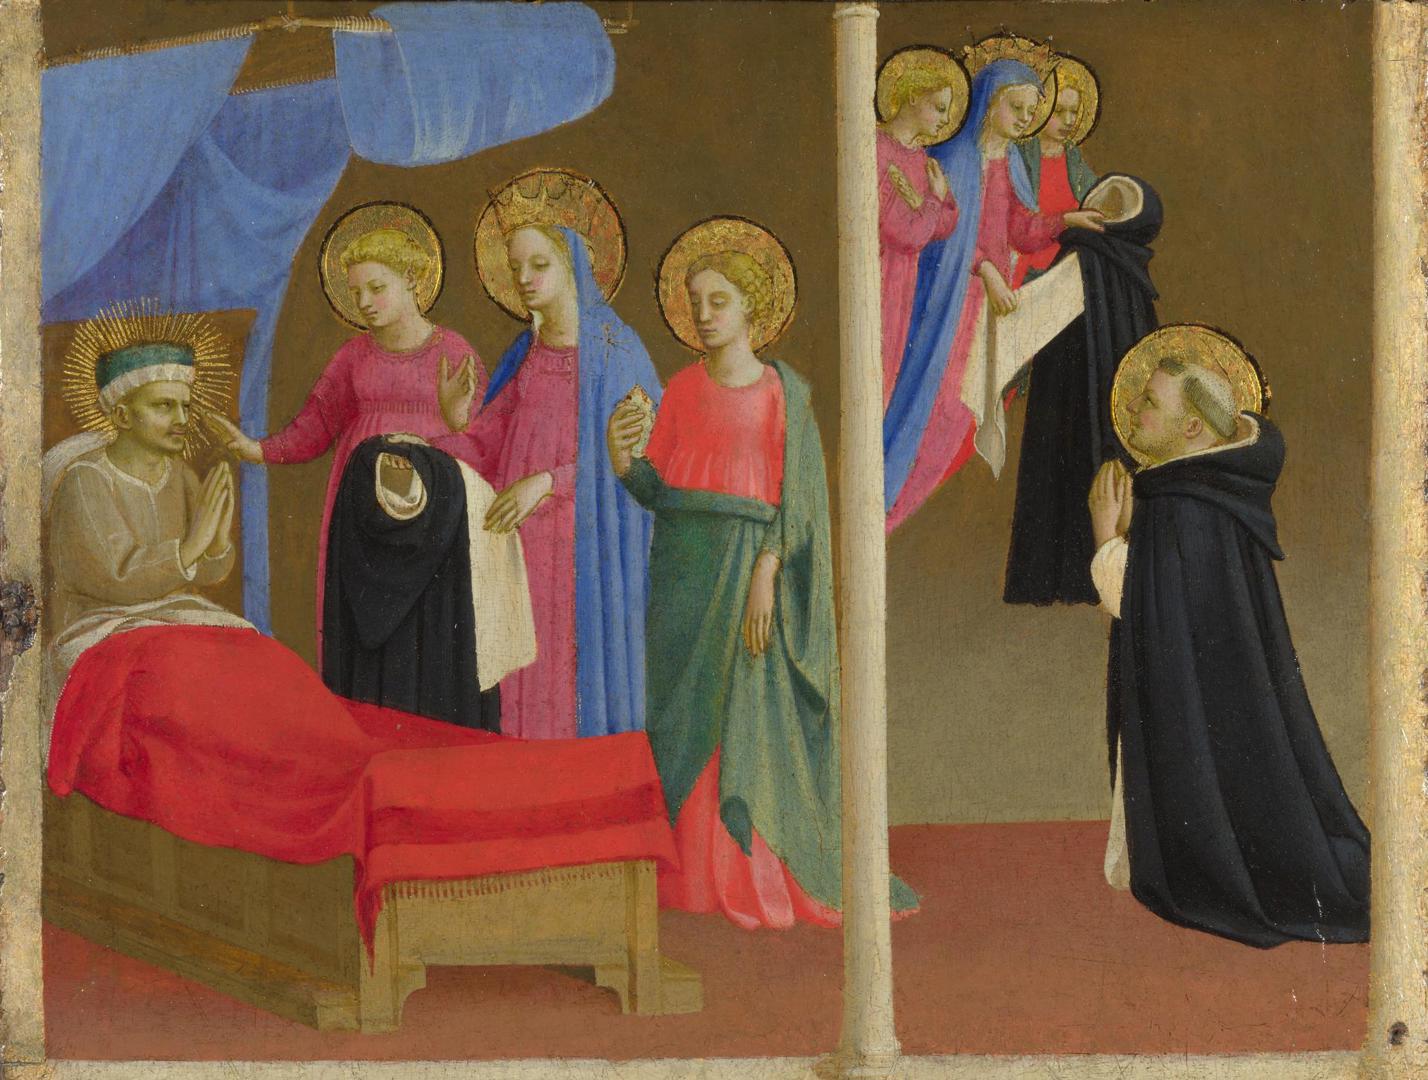 The Vision of the Dominican Habit by Workshop of Fra Angelico